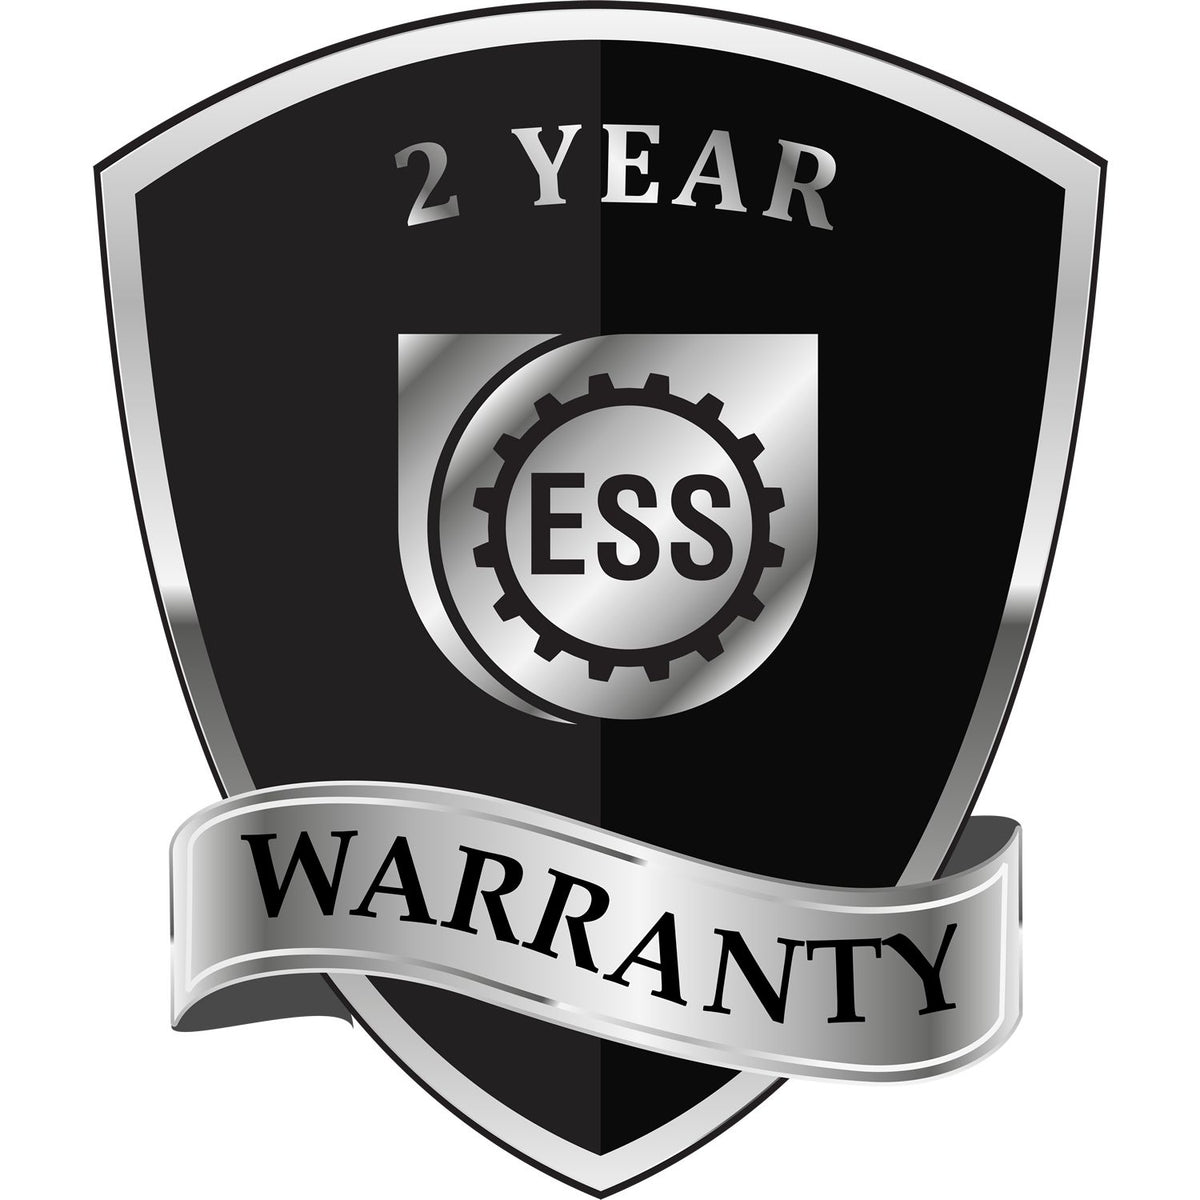 A badge or emblem showing a warranty icon for the Texas Engineer Desk Seal